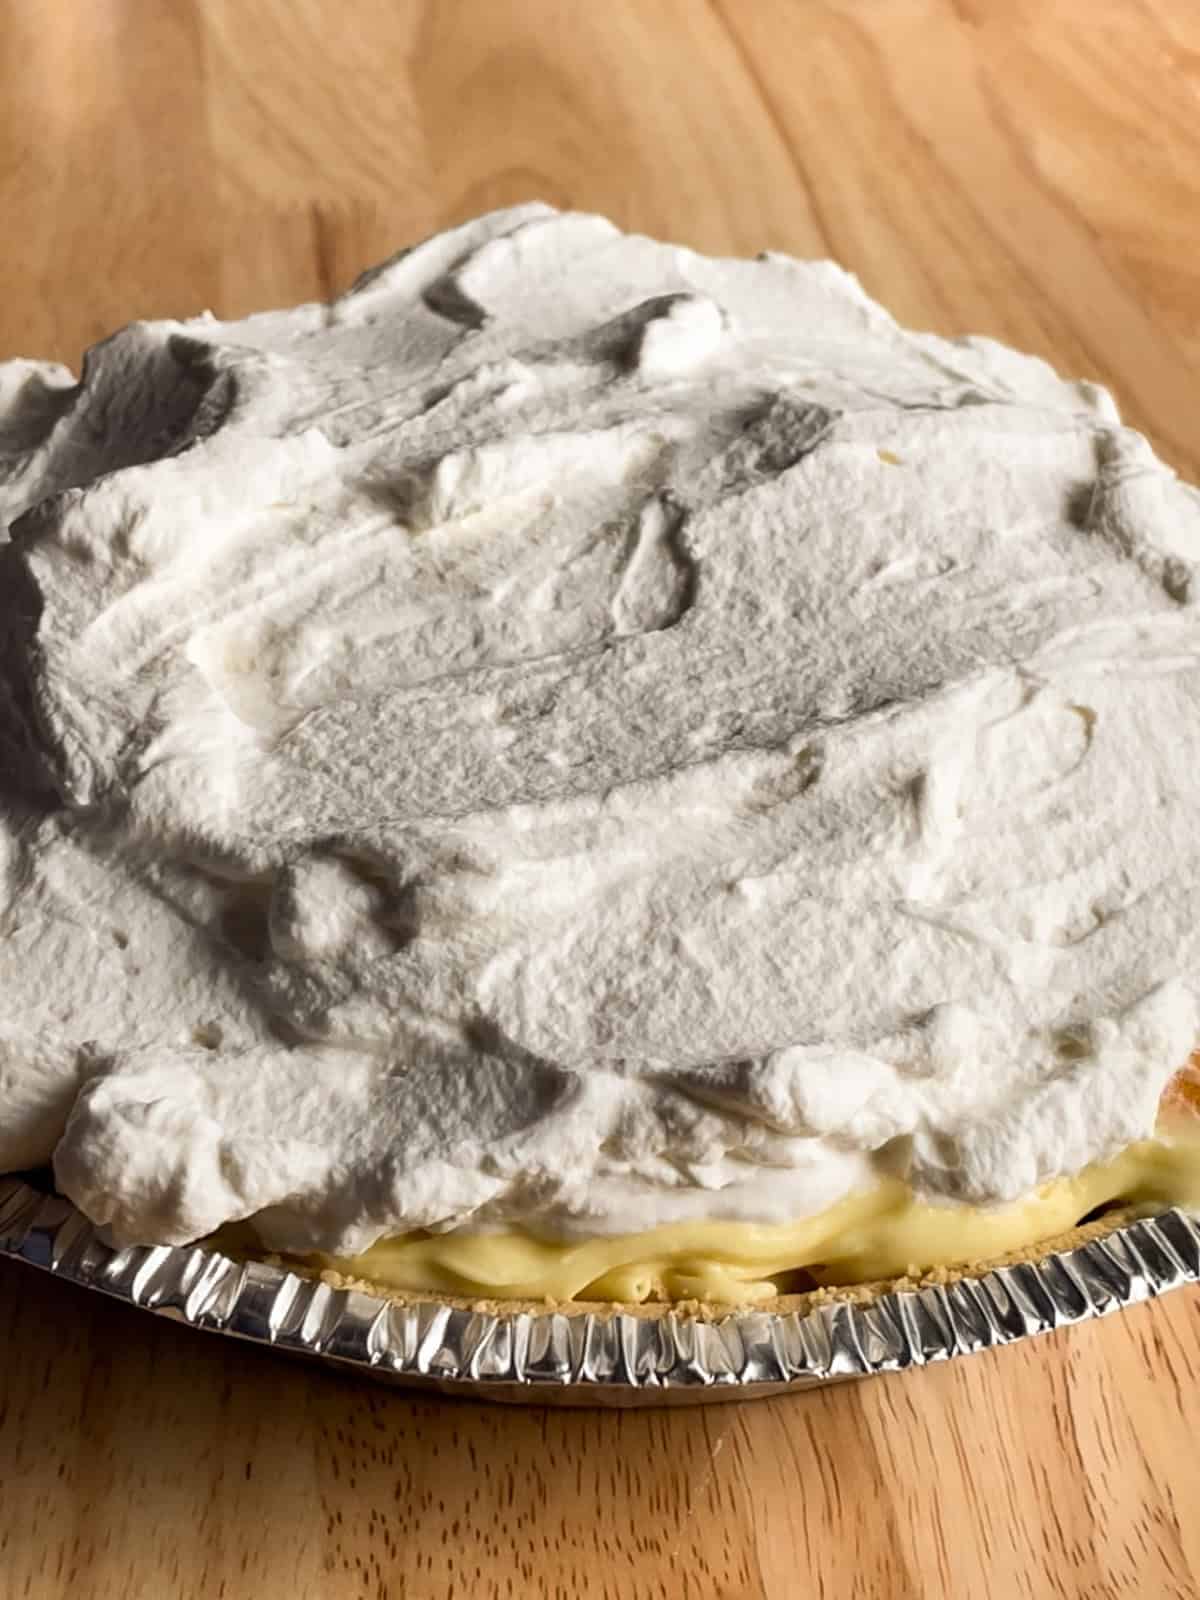 Banana pudding pie topped with a layer of whipped cream.